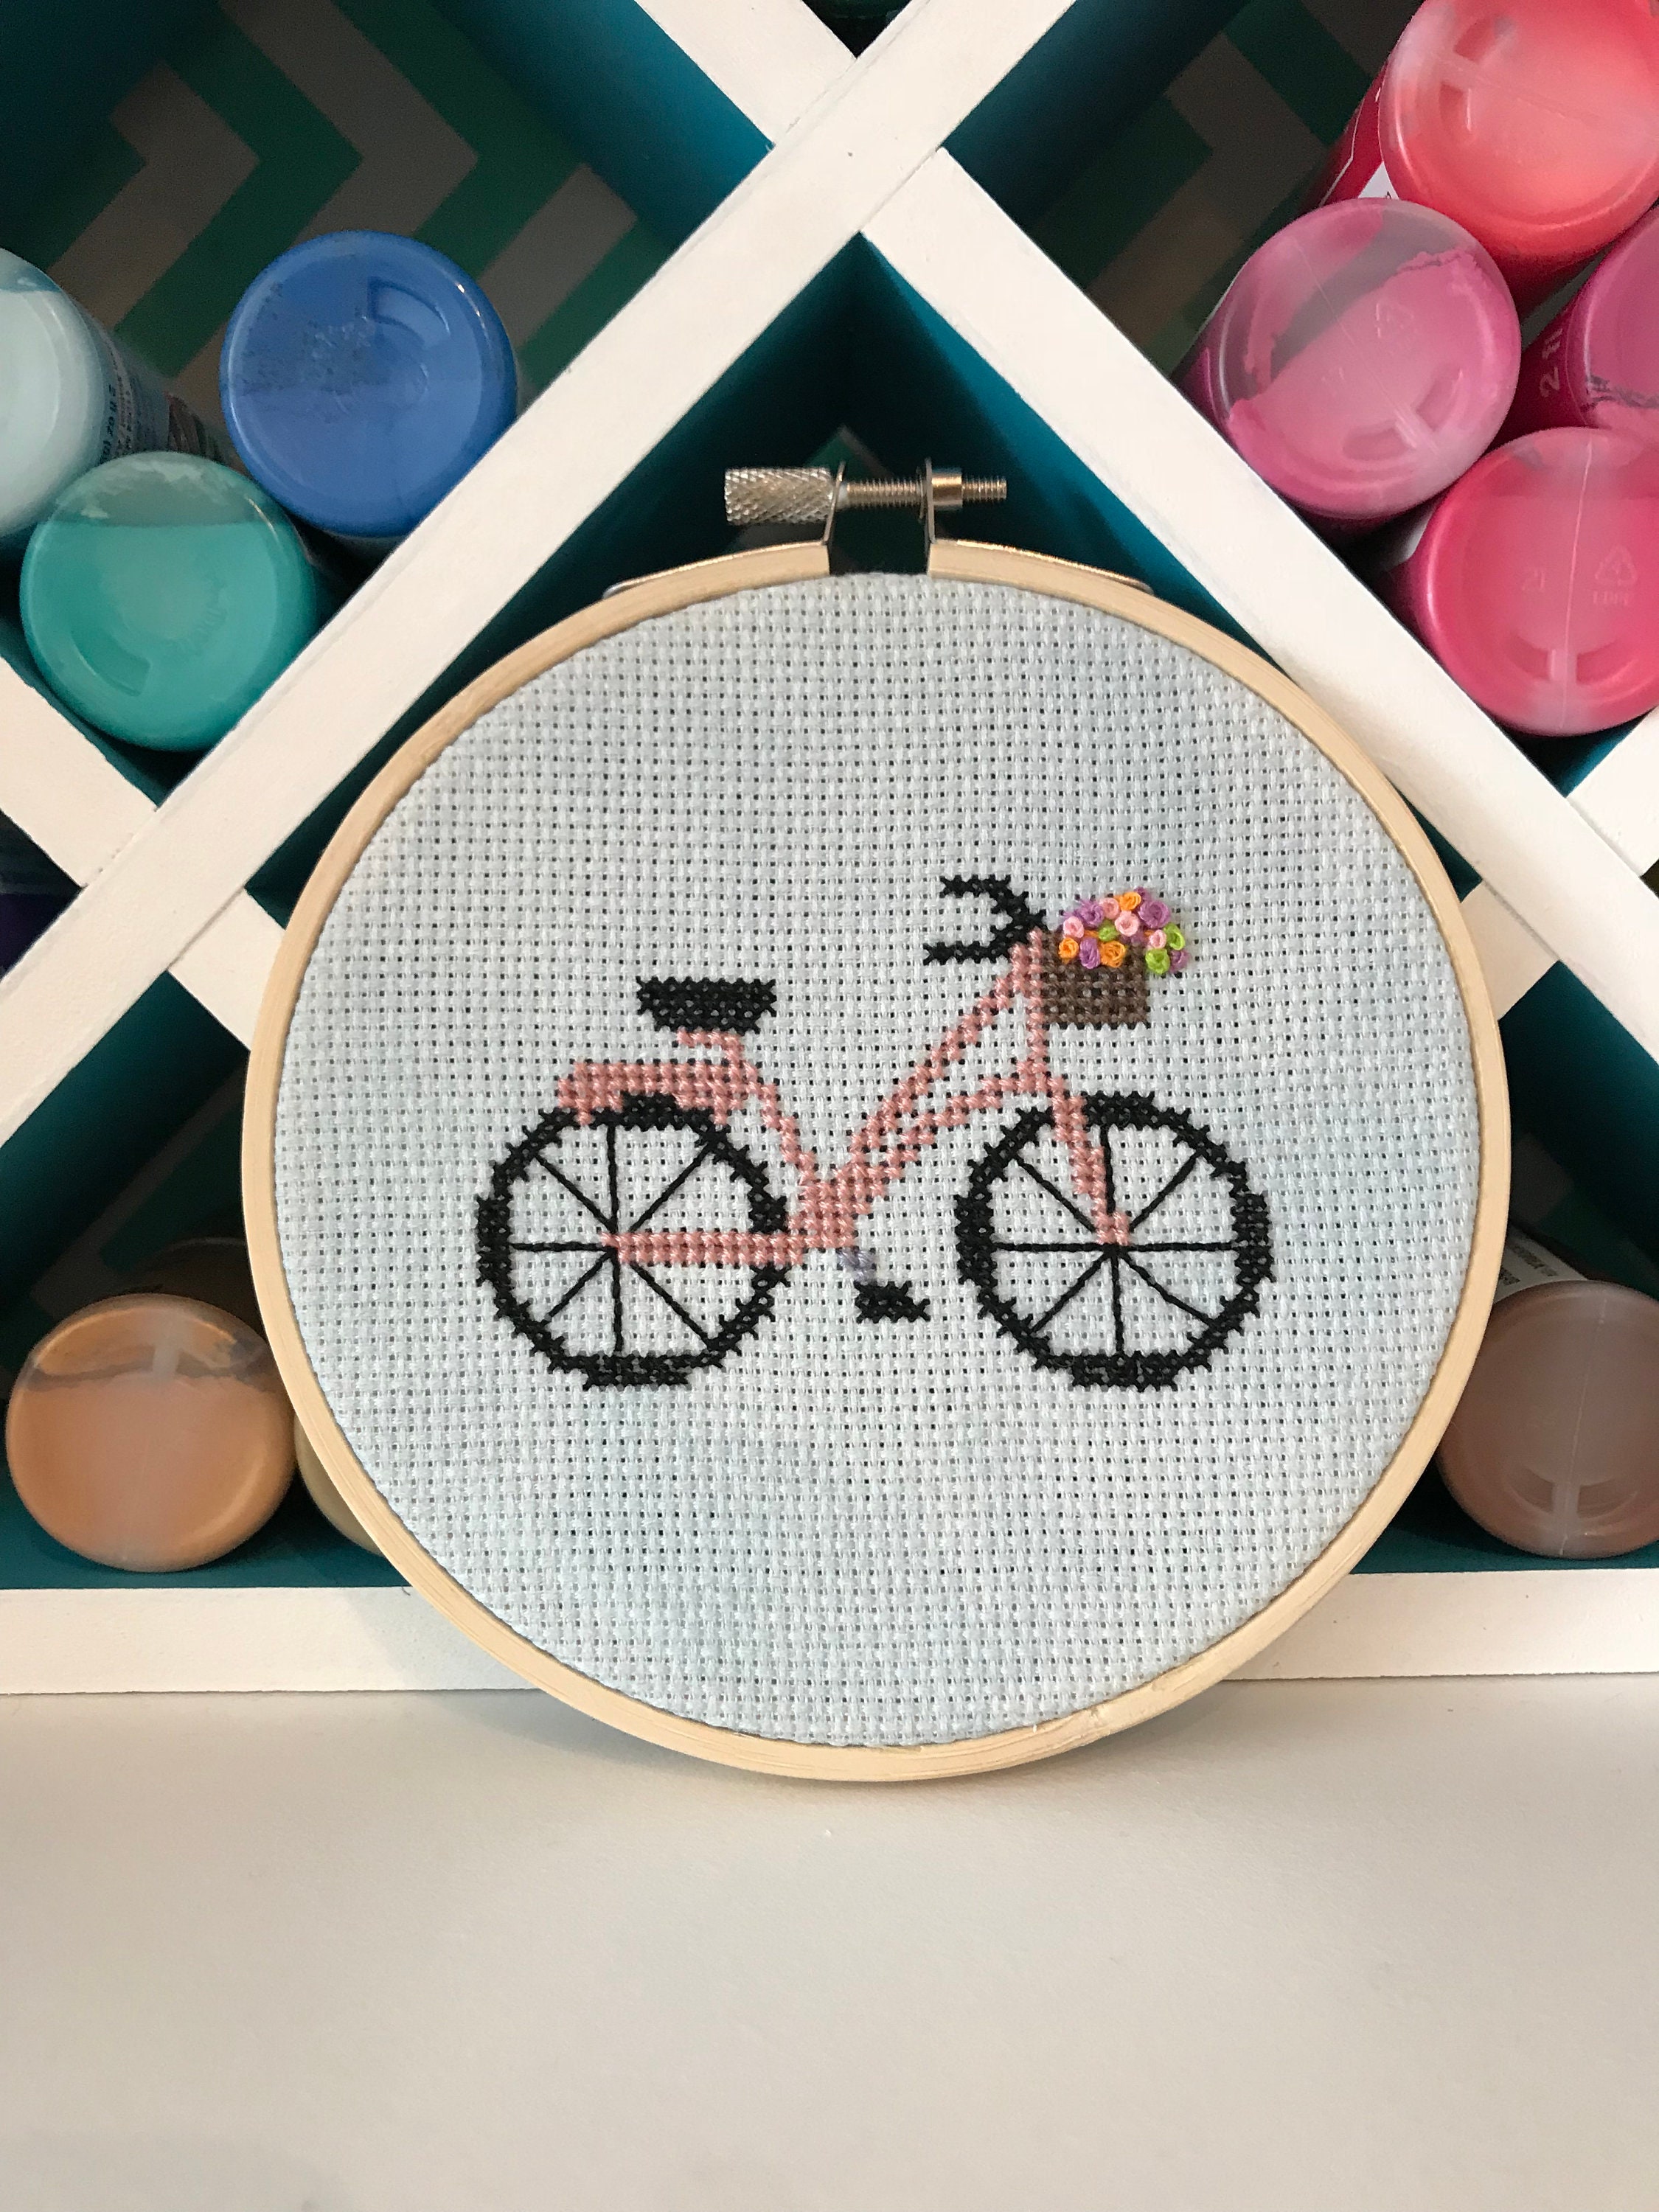 REHTRAD Embroidery Beginner Kits for Adults Kids, Cross Stitch